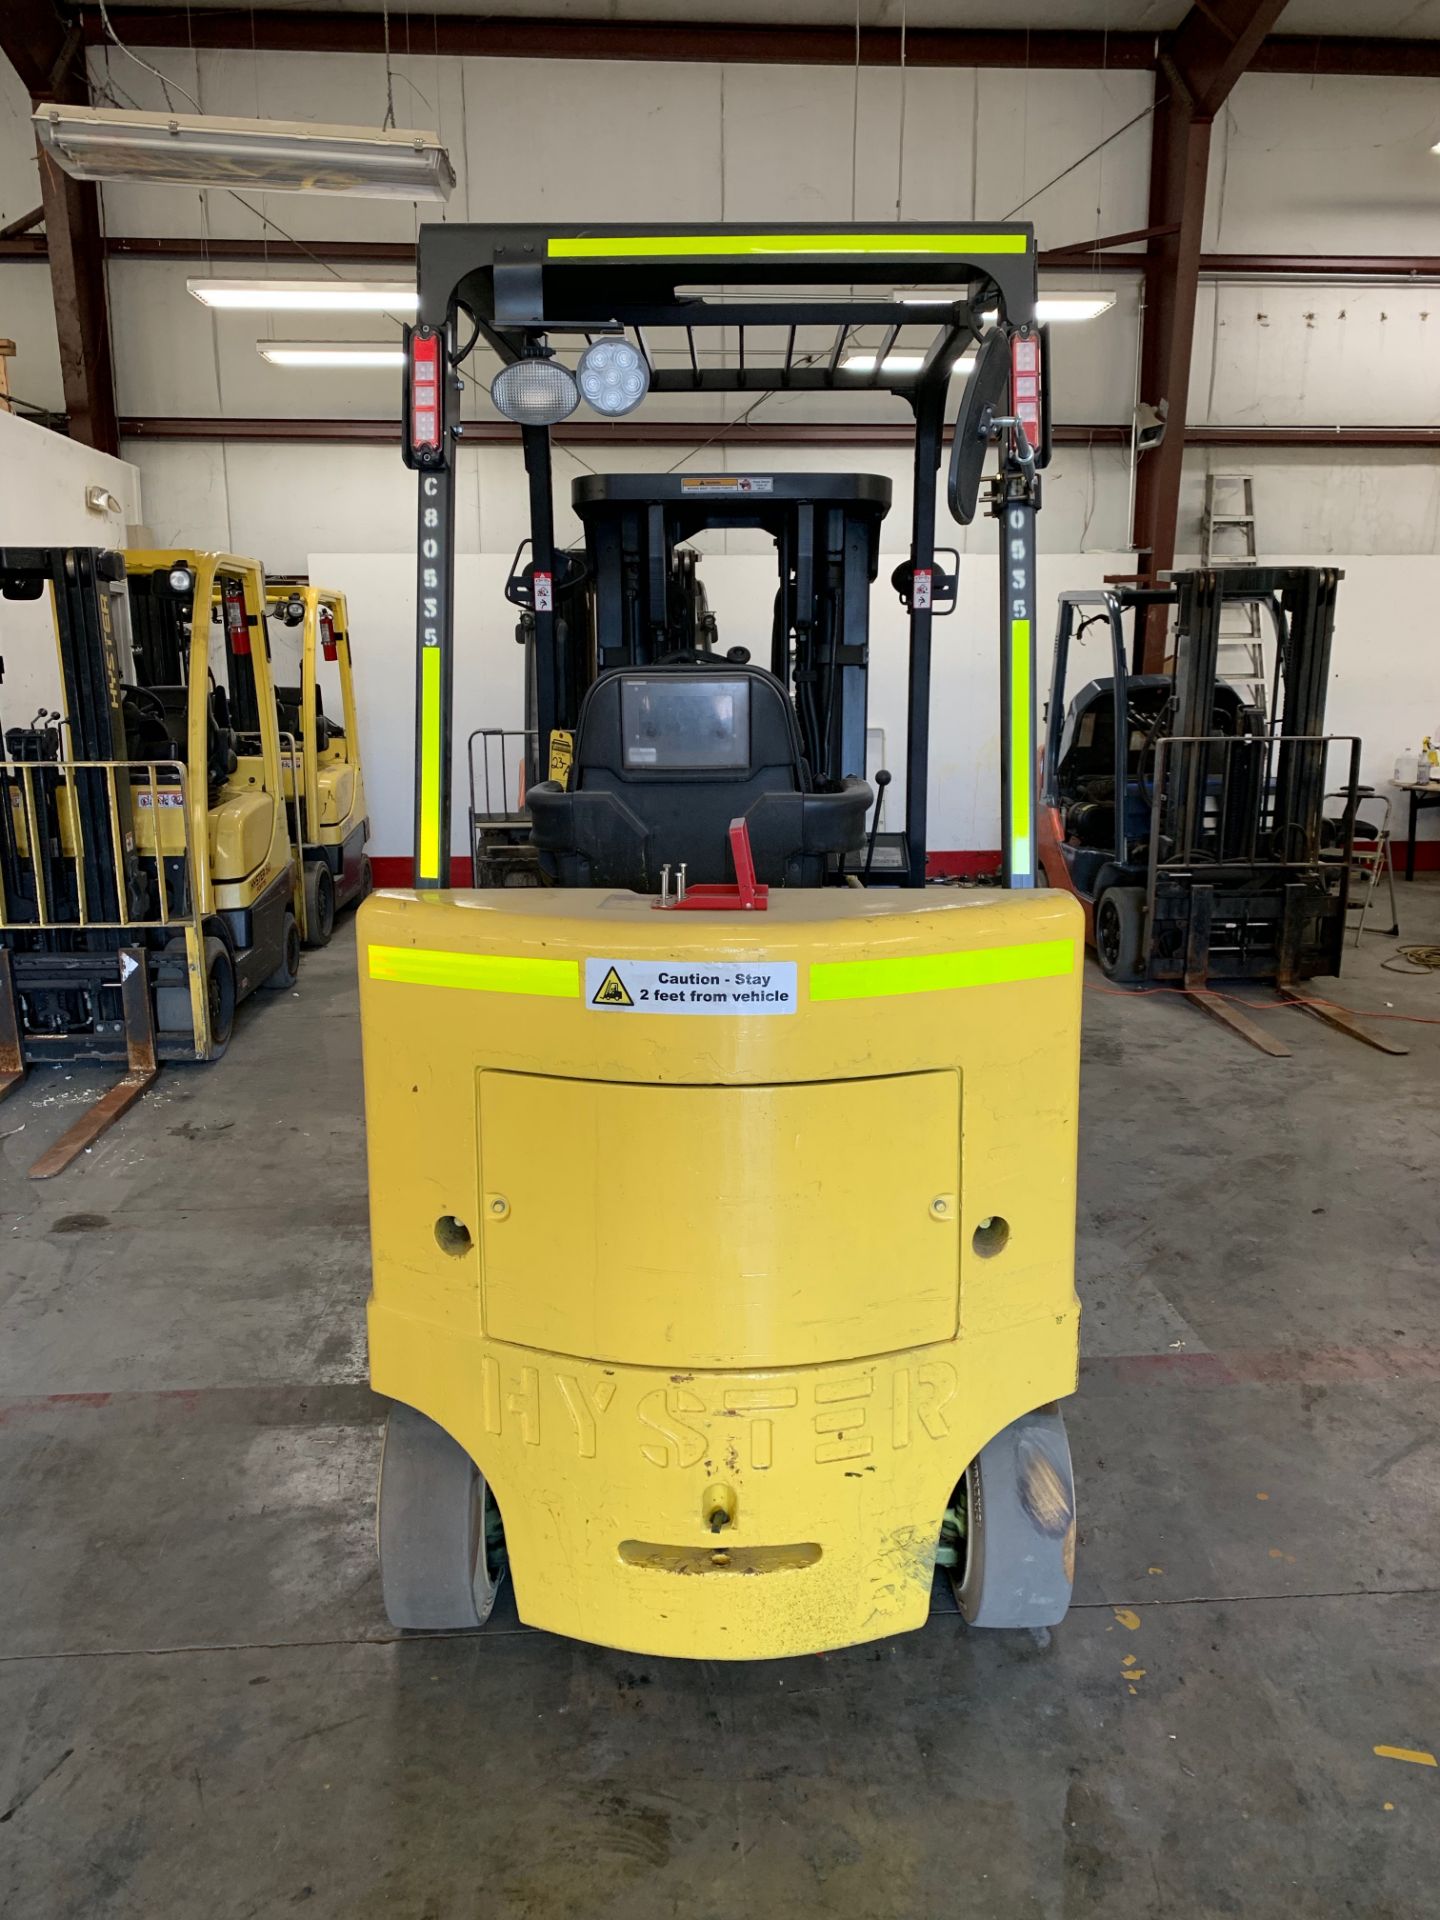 2010 HYSTER 8,000-LB CAPACITY FORKLIFT CHASSIS ONLY, MODEL: E80Z, SIDESHIFT, 48 VOLT, (NO BATTERY) - Image 5 of 10